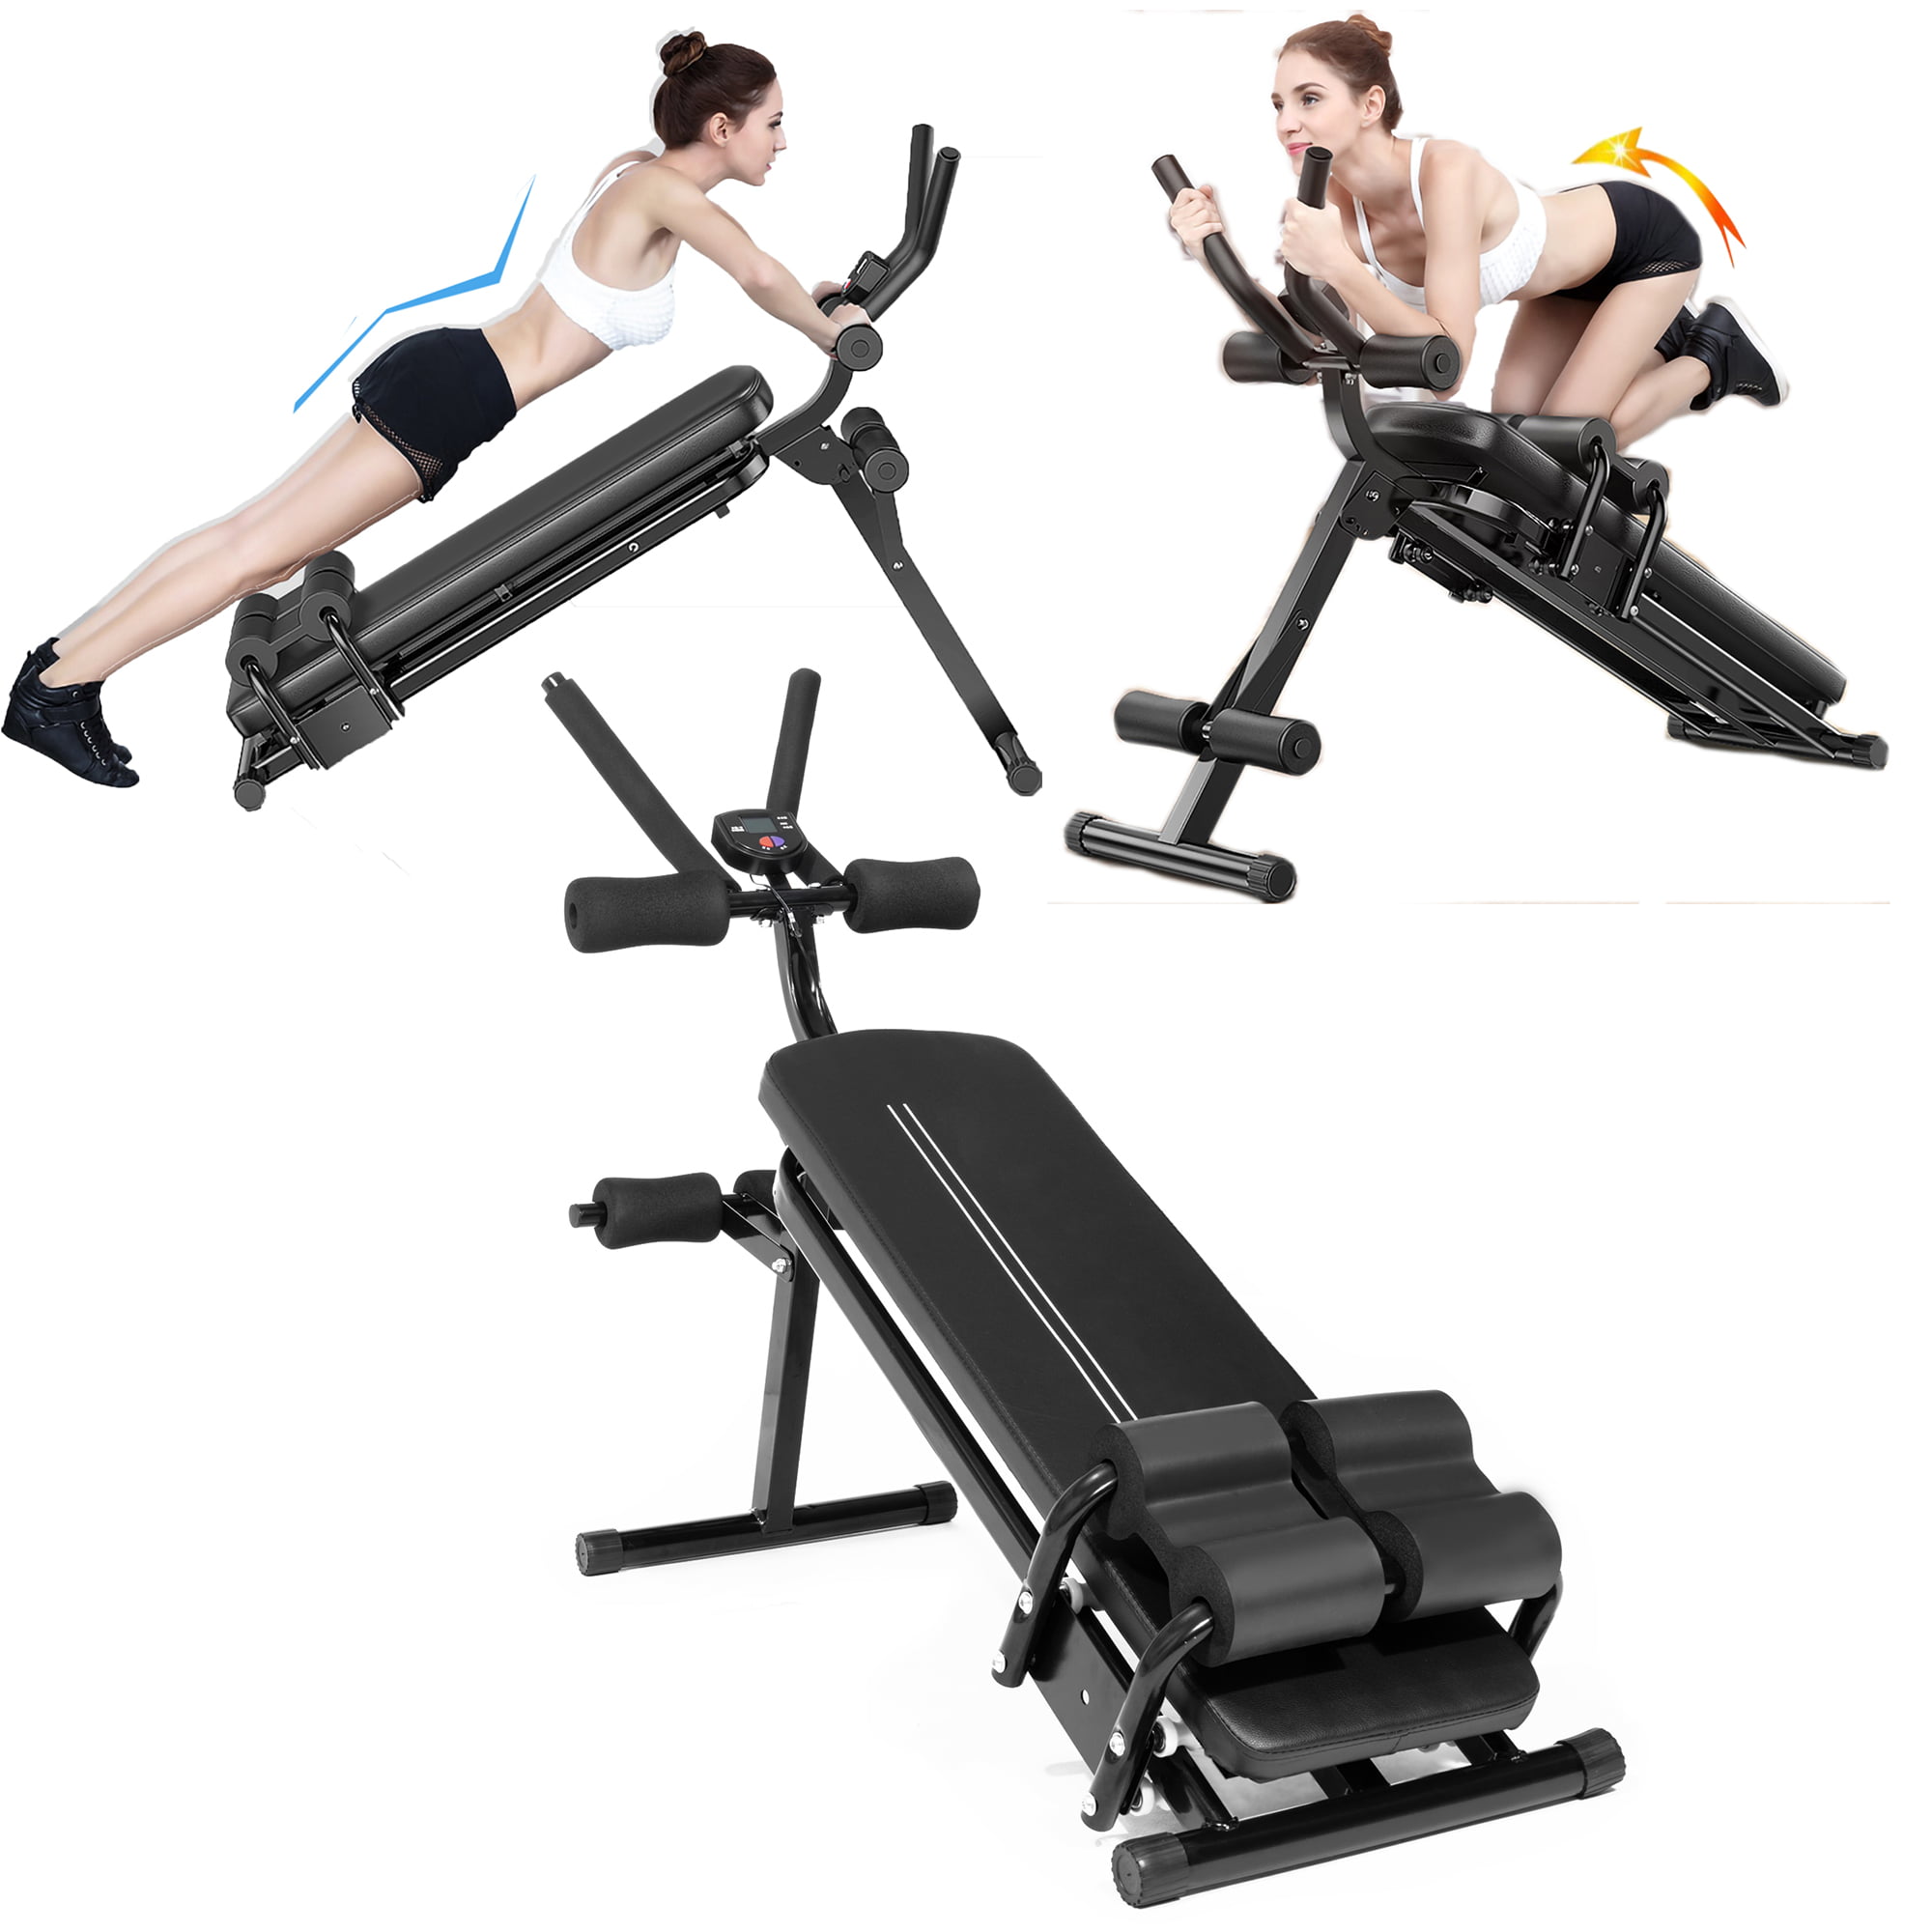 Ab Bench Fitness Workout Home Gym Sit Weight Body Abs Exercise Adjustable New 